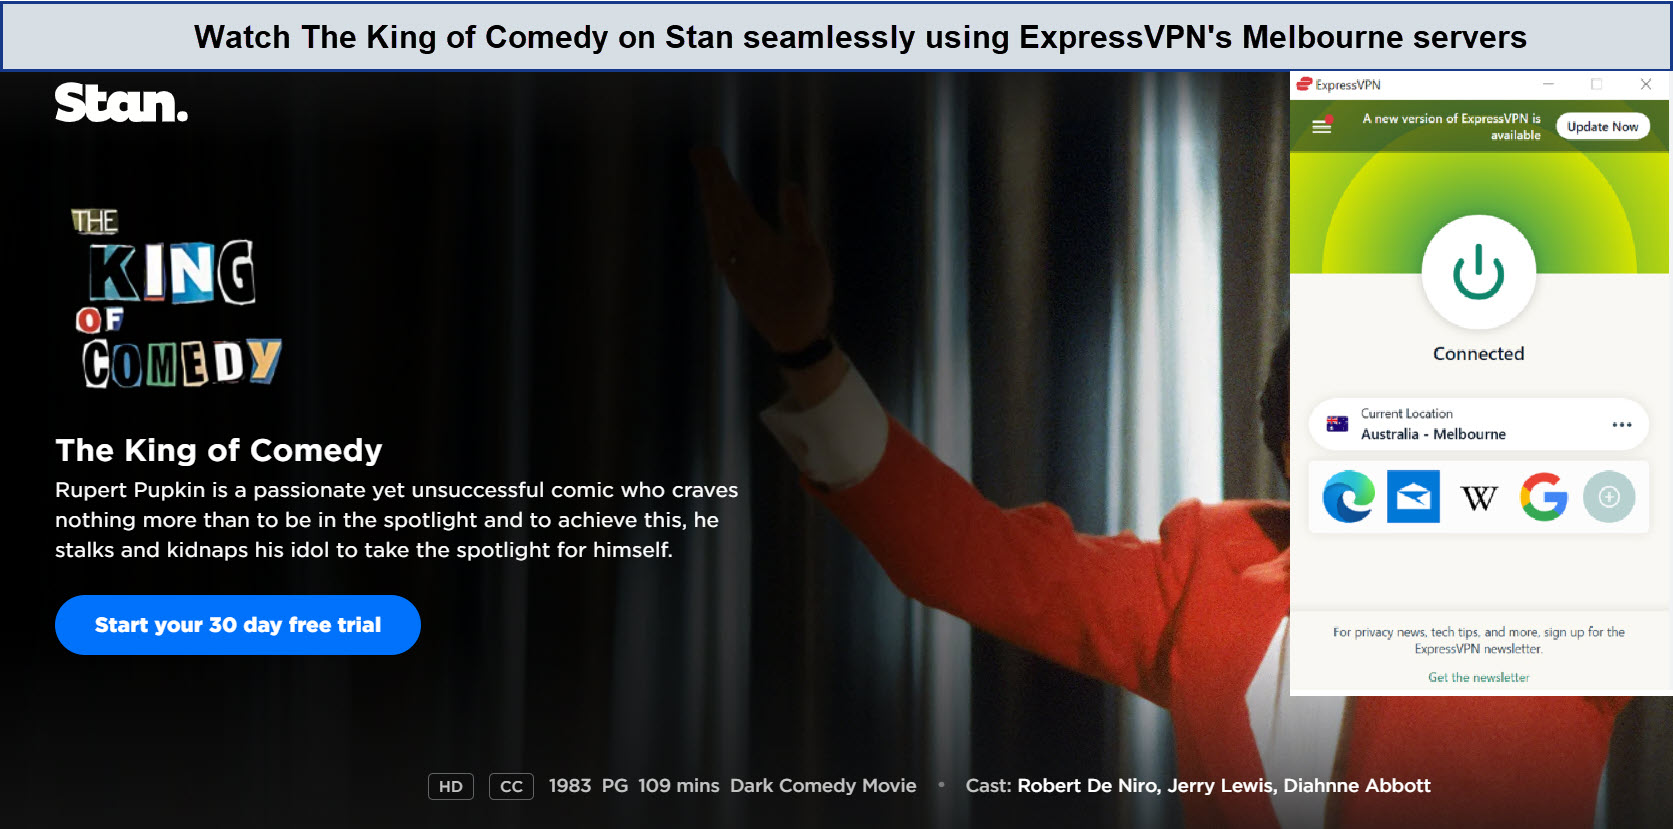 Watch-The-King-of-Comedy-on-Stan-using-ExpressVPN-outside-Australia